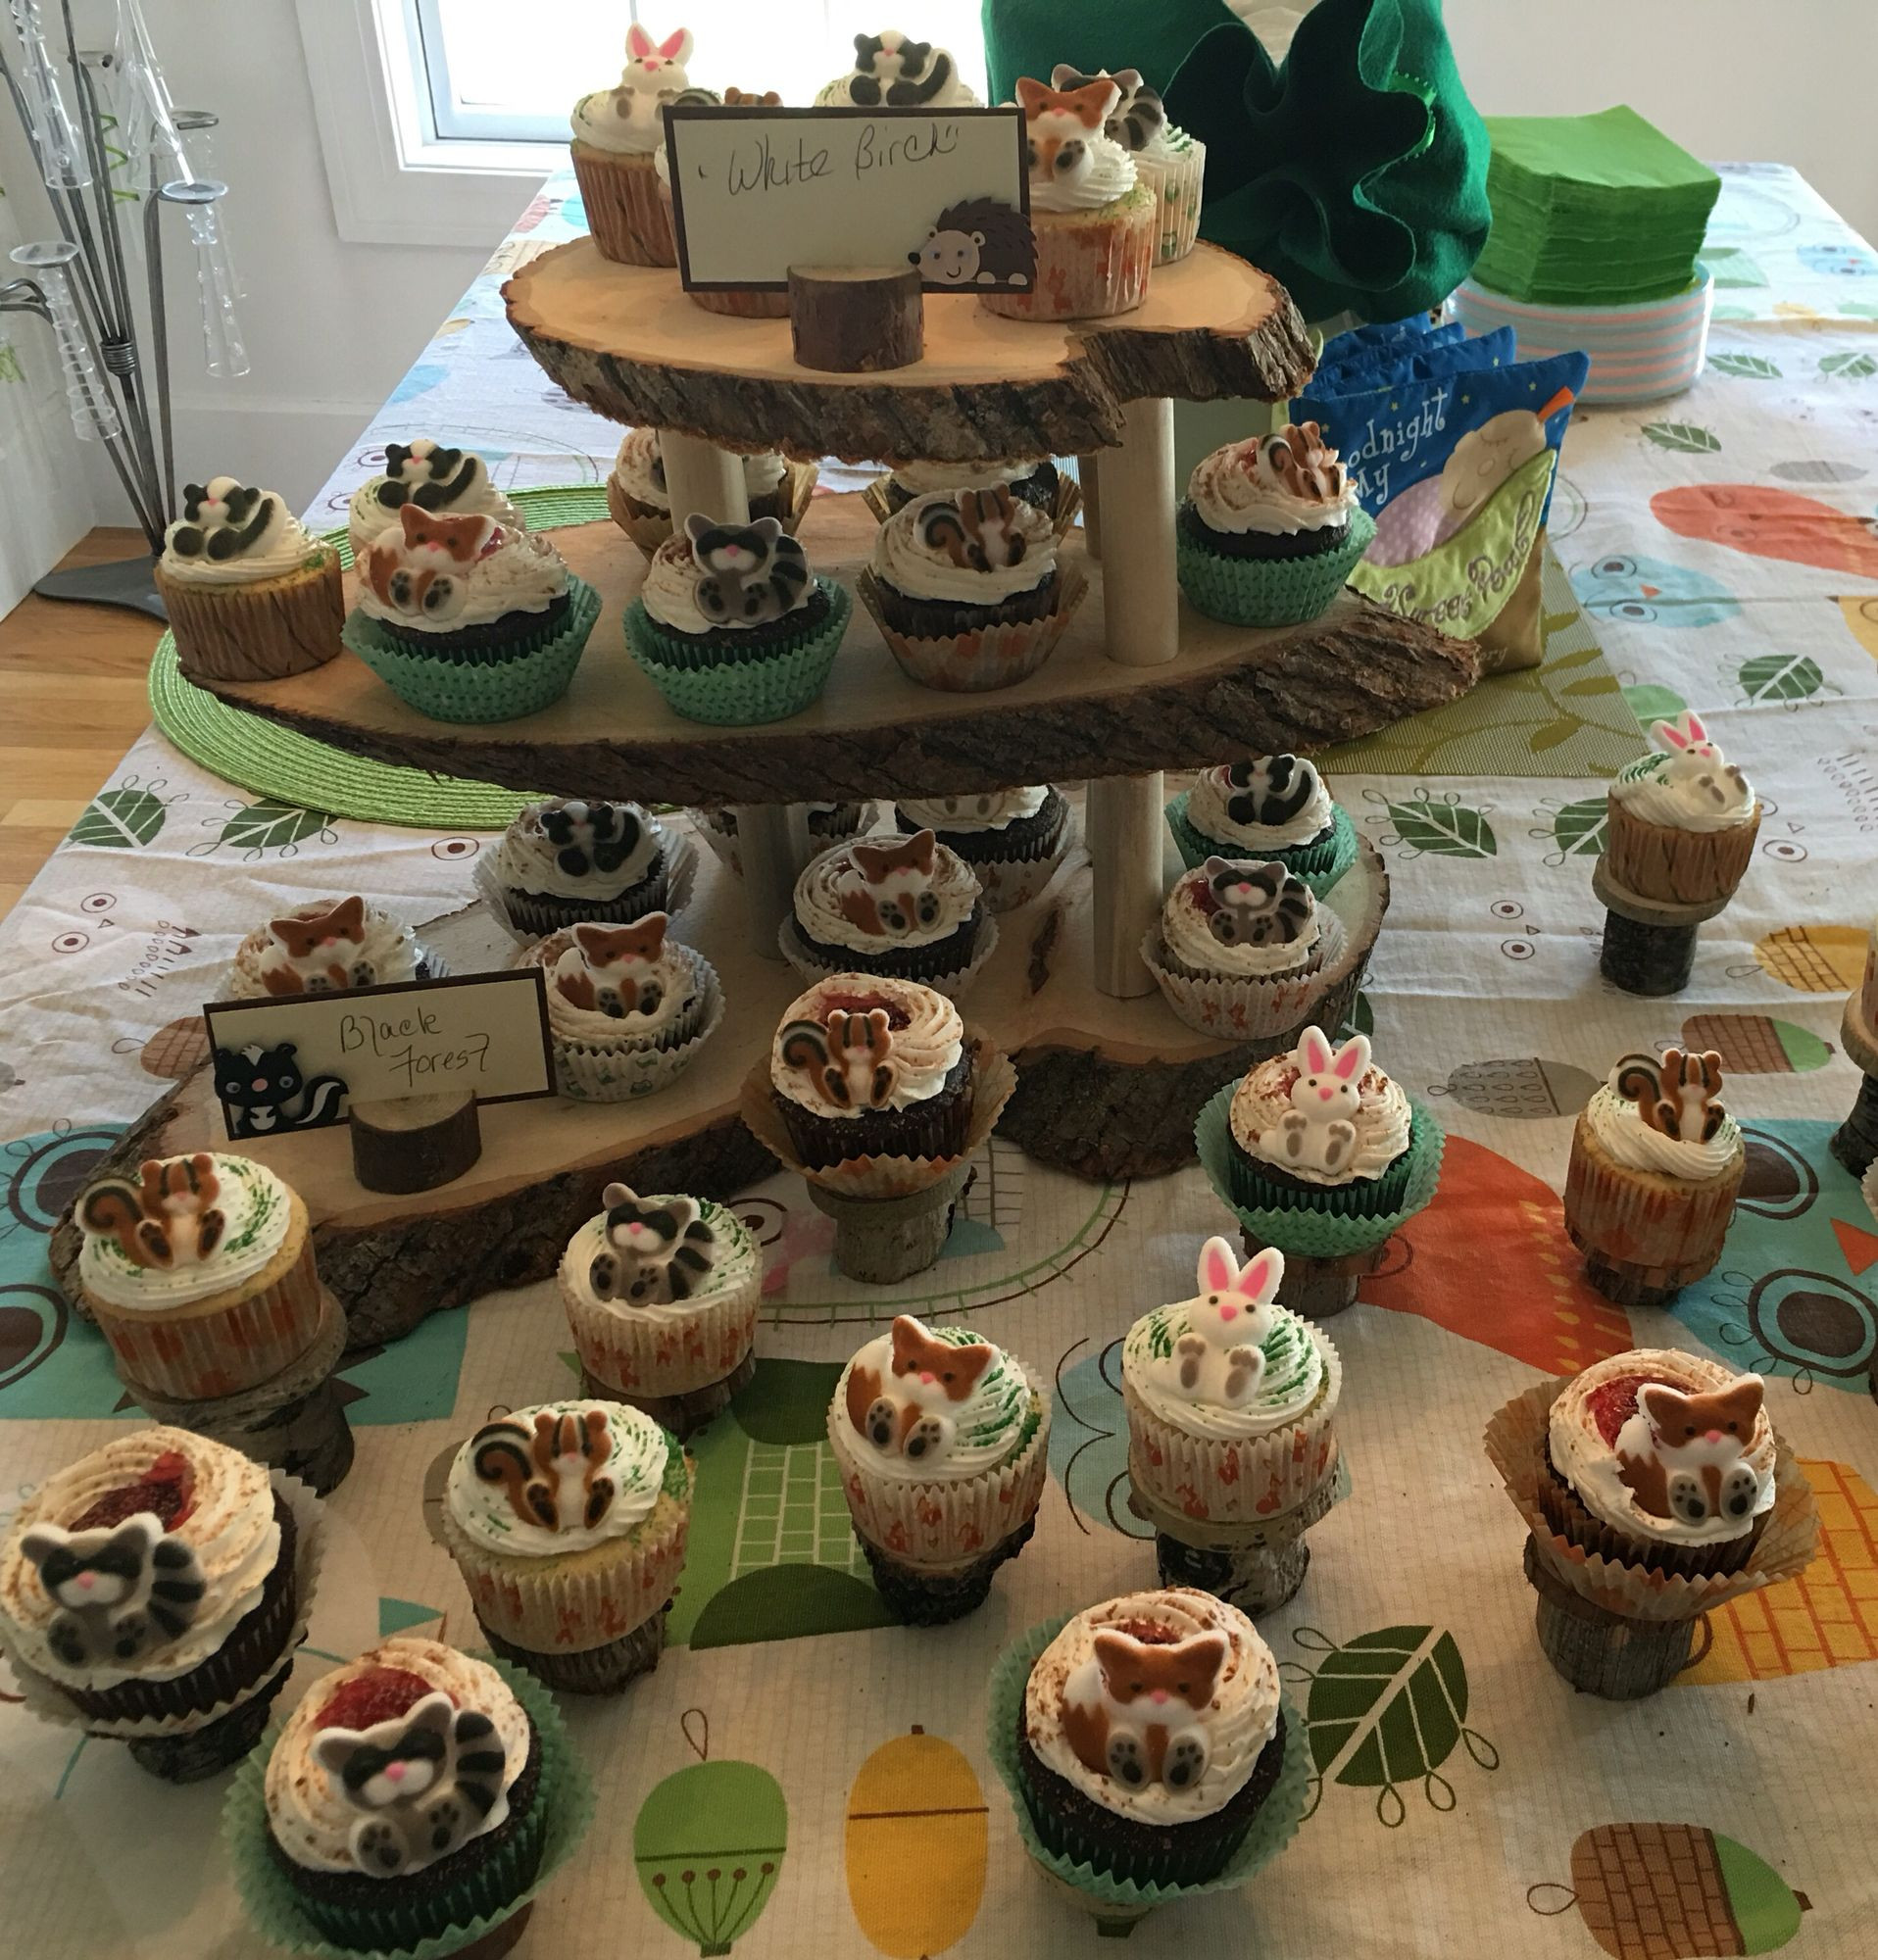 The Most Shared Woodland themed Baby Shower Cupcakes
 Of All Time